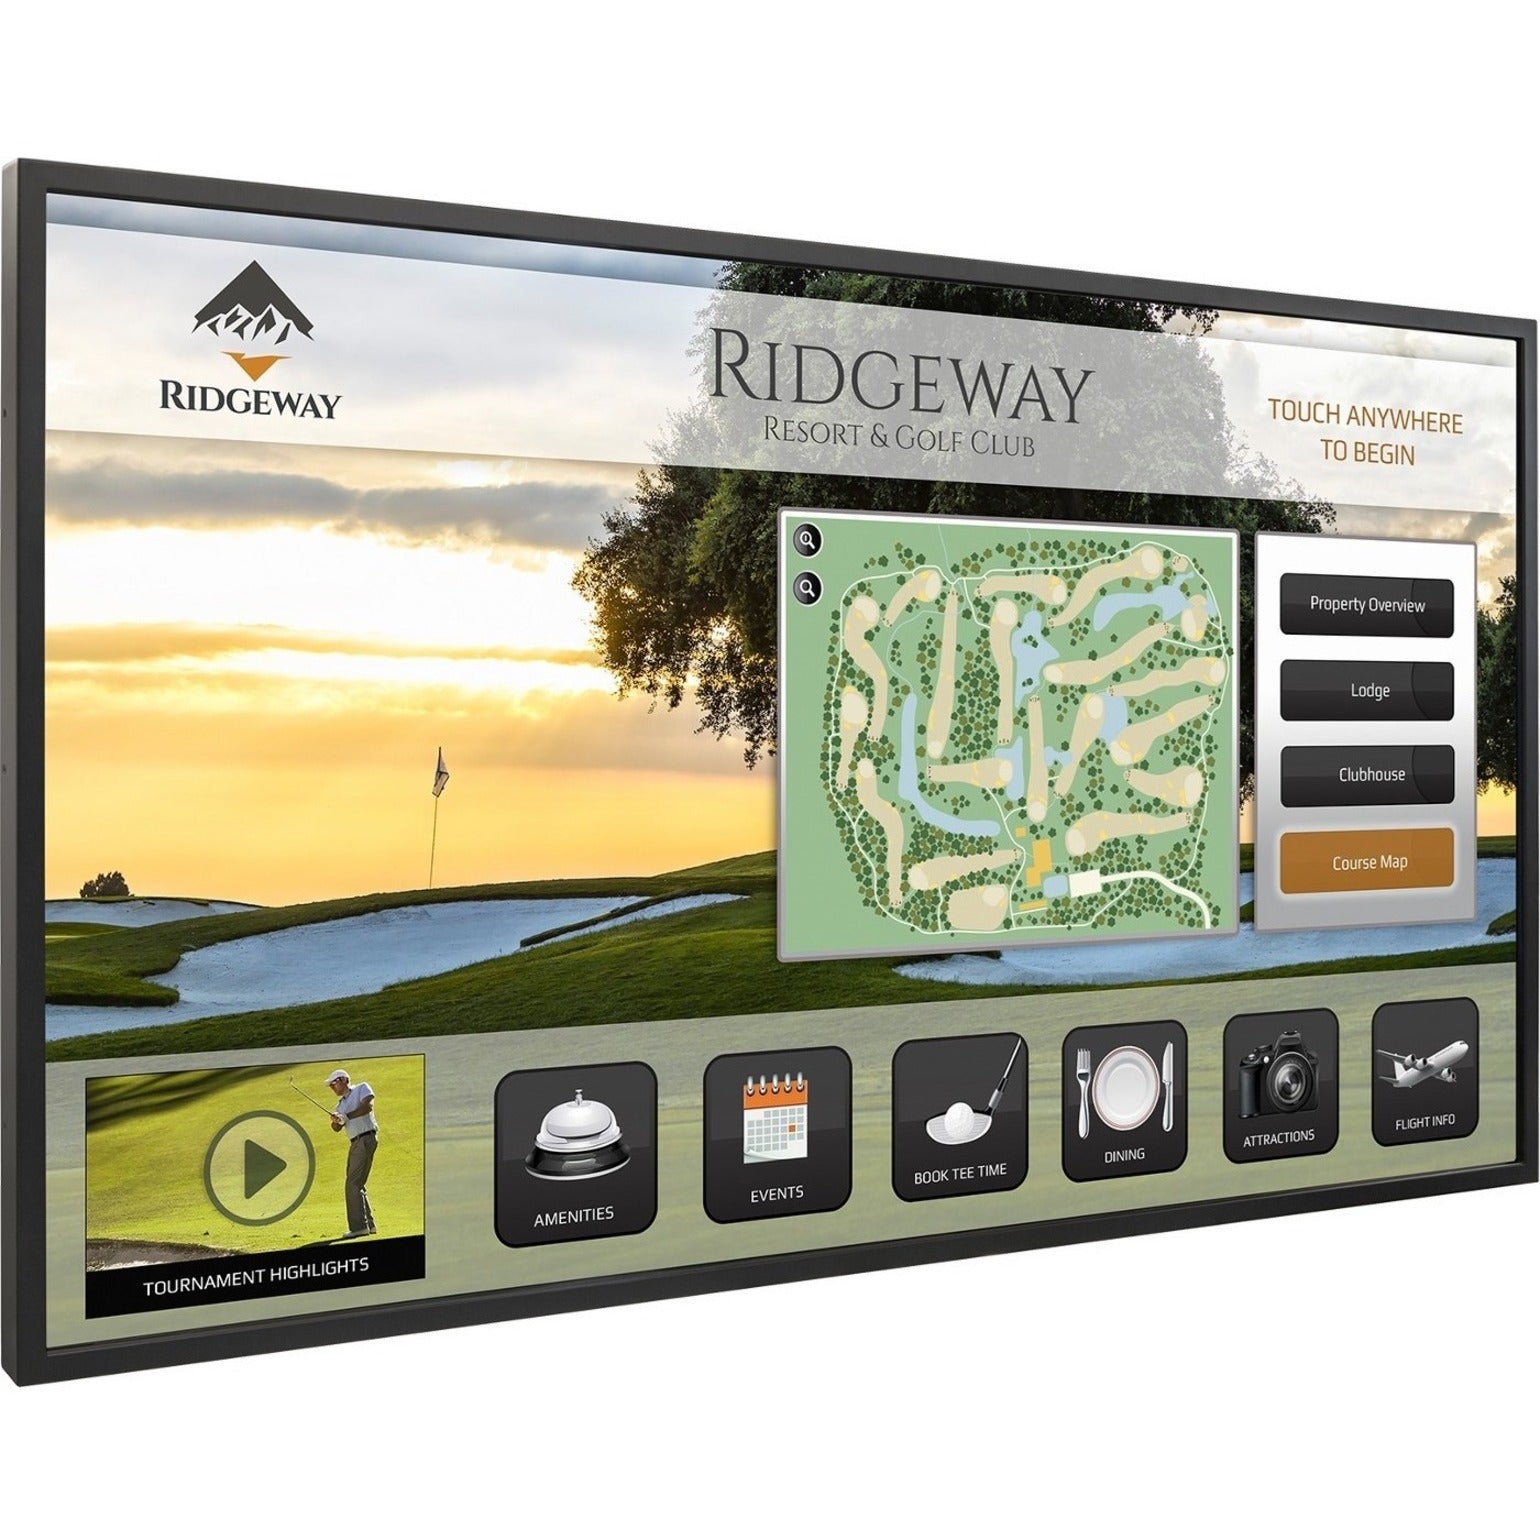 Planar 997-9249-02 EP5024K-T 4K Interactive LCD Display, 50" Screen Size, Touchscreen, Edge LED, 3 Year Warranty